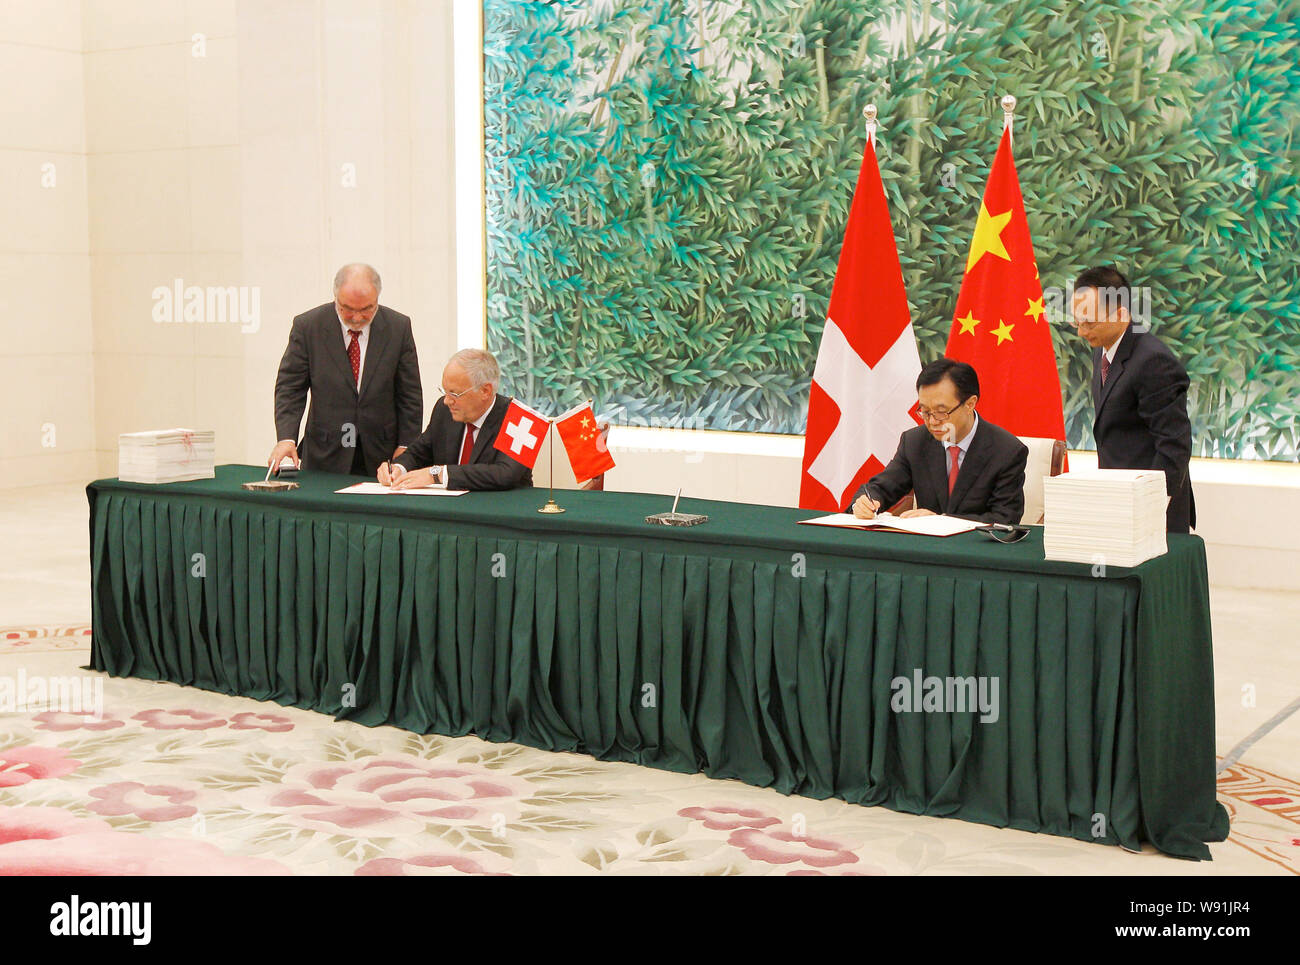 Chinese Commerce Minister Gao Hucheng, right, and Swiss Federal Counsellor Johann Schneider-Ammann, left, signing a free trade agreement at Chinas Min Stock Photo